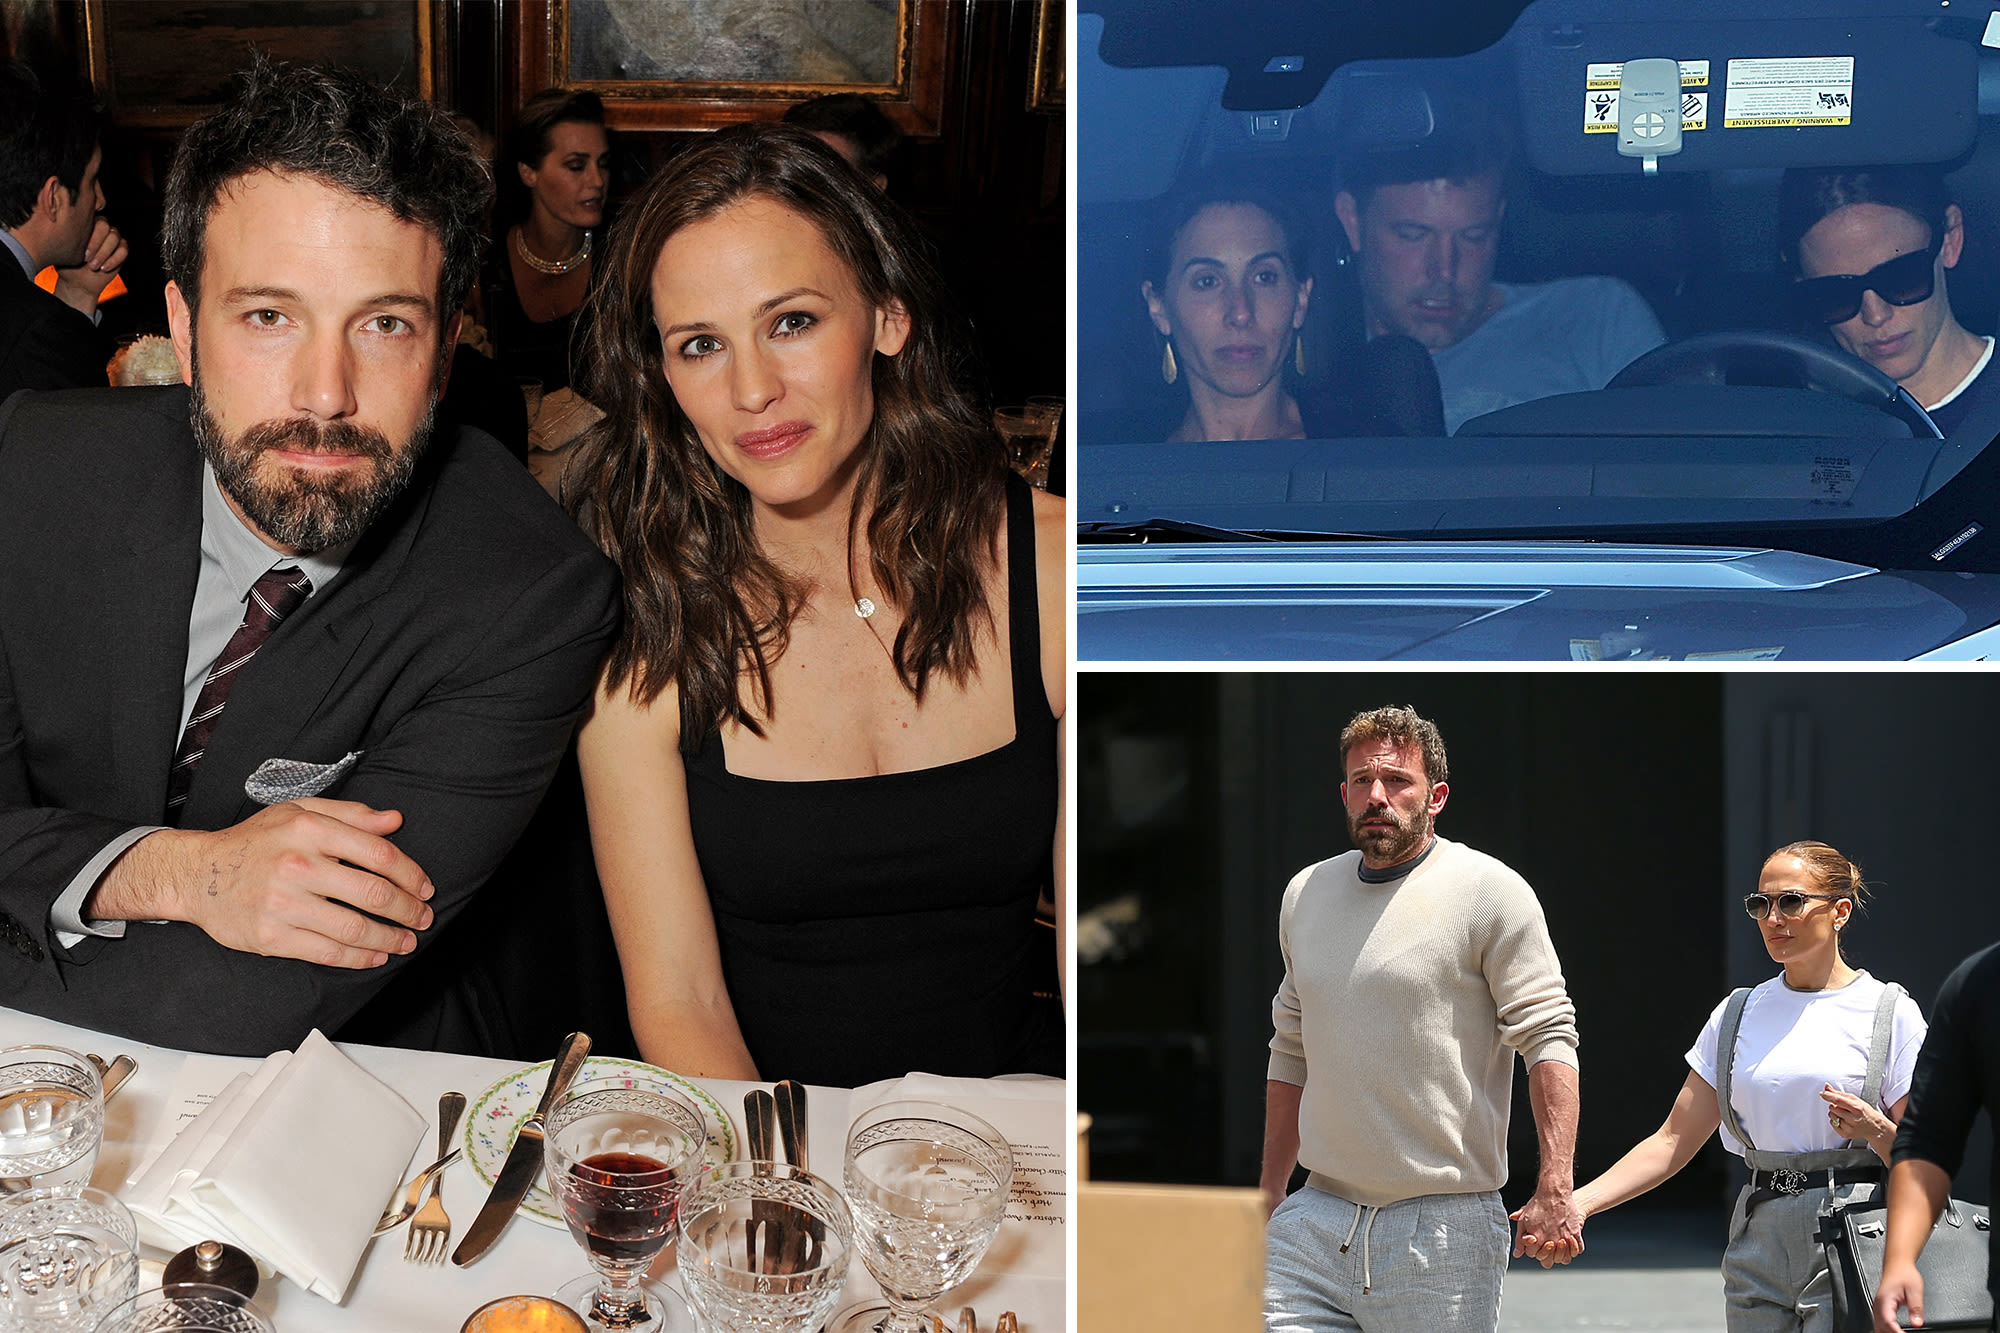 Jennifer Garner will ‘have to pick up the pieces’ if Ben Affleck falls off wagon again: source